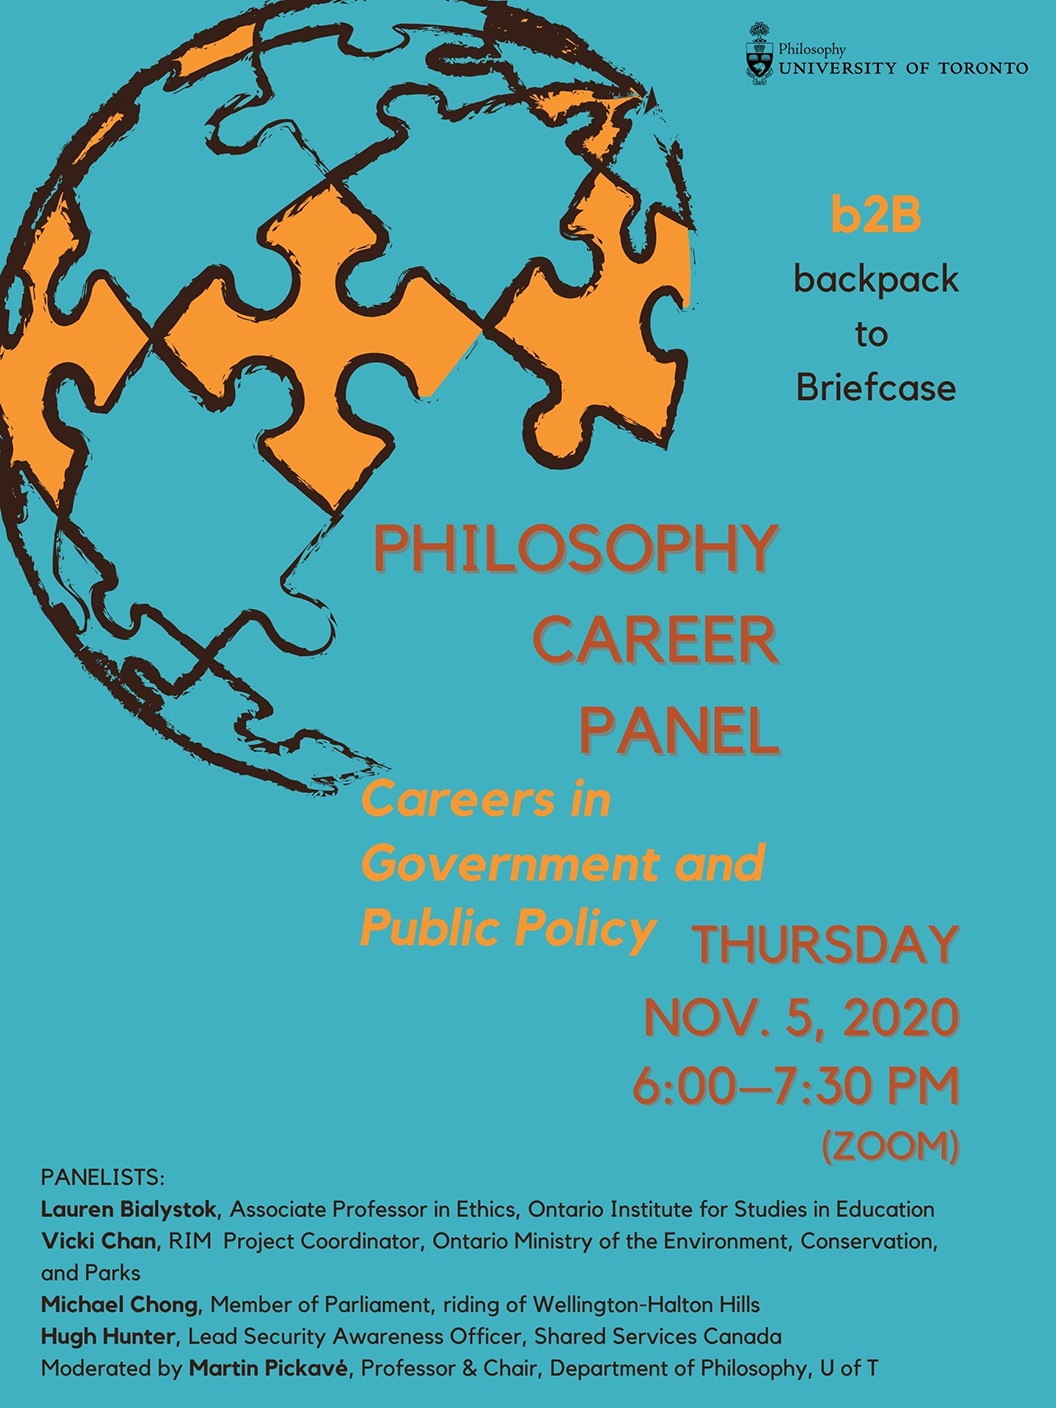 Philosophy's Career Panel flyer showing date and time